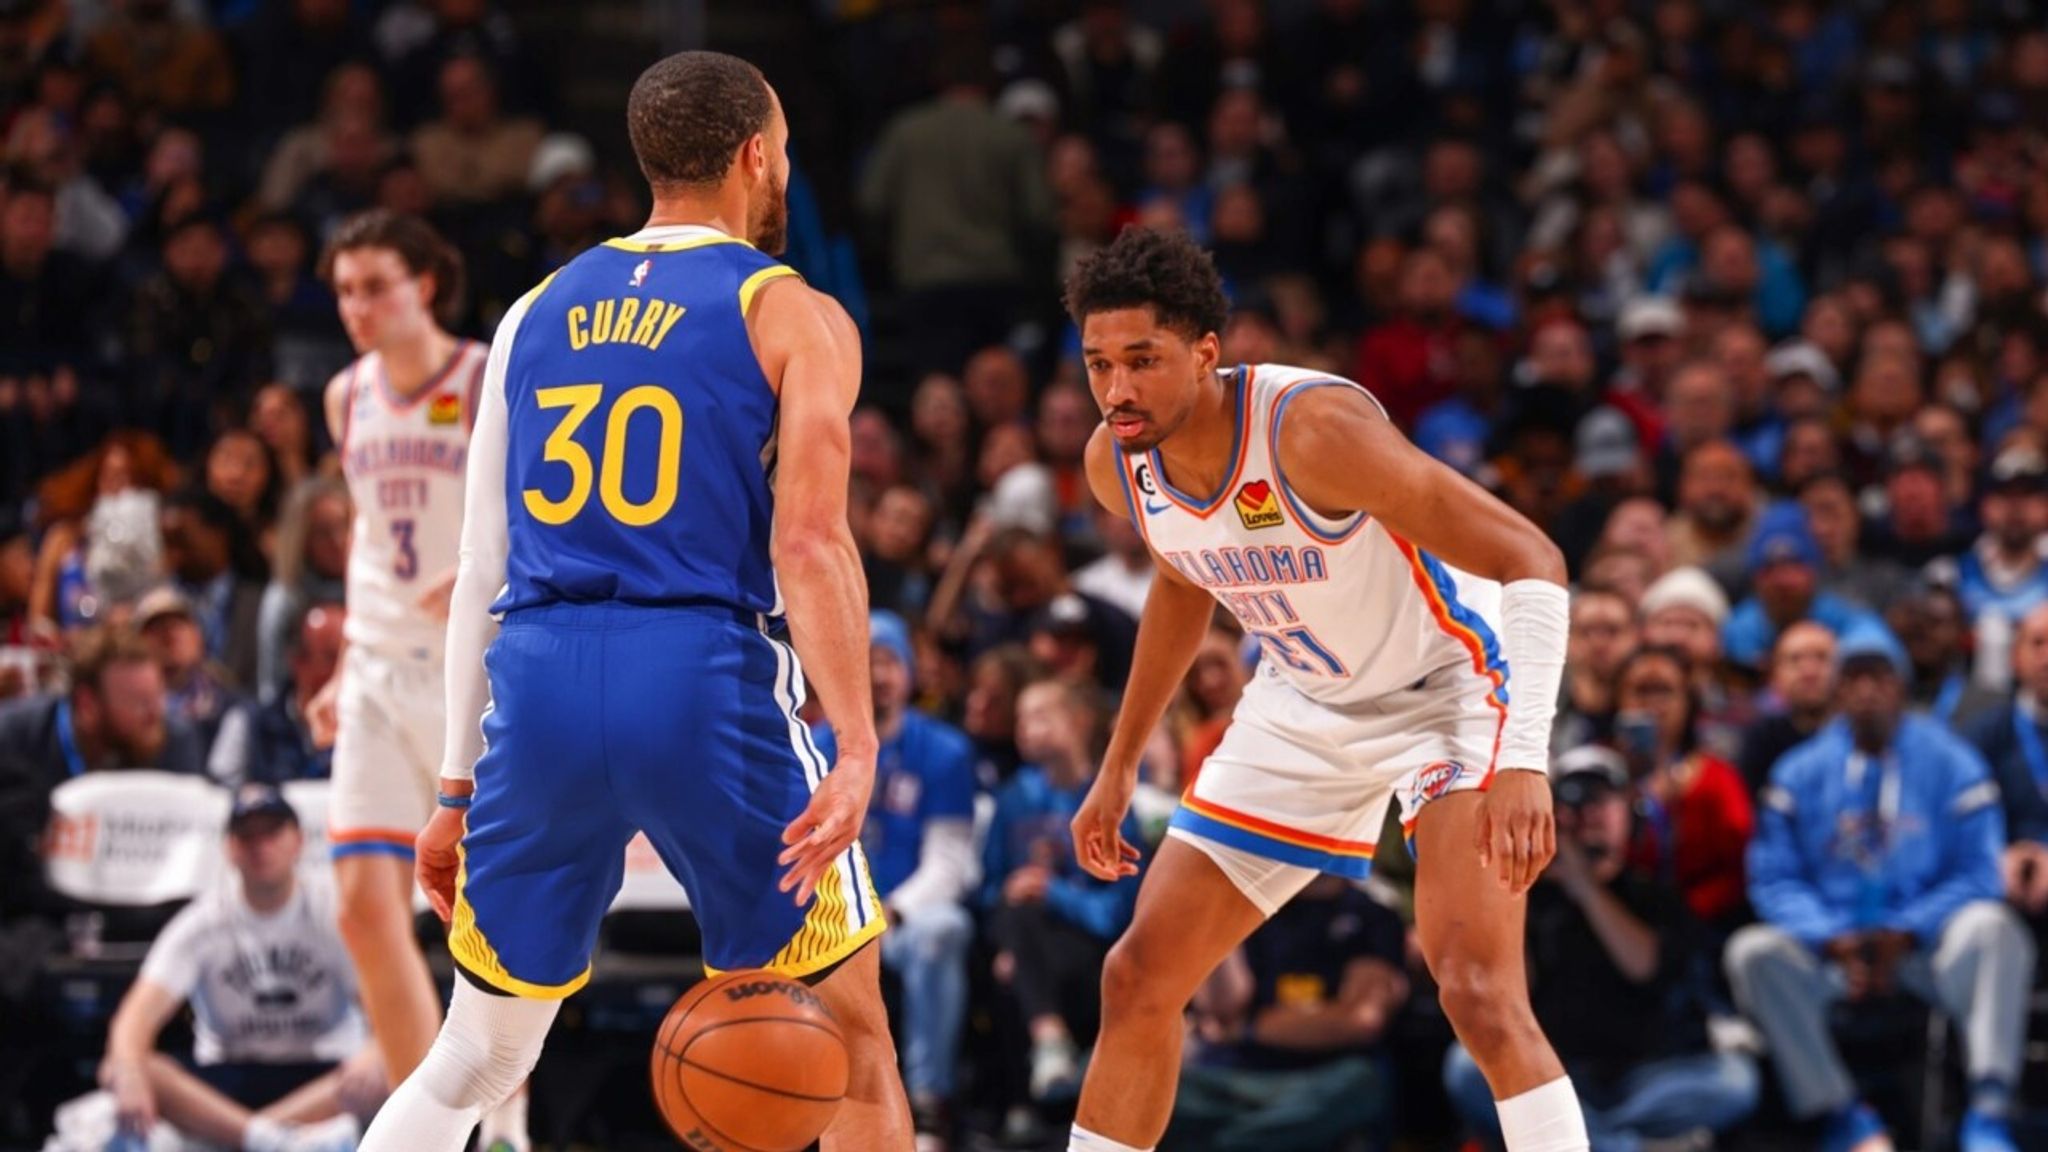 PHOTOS: Best images from the Thunder's 128-120 loss to the Warriors